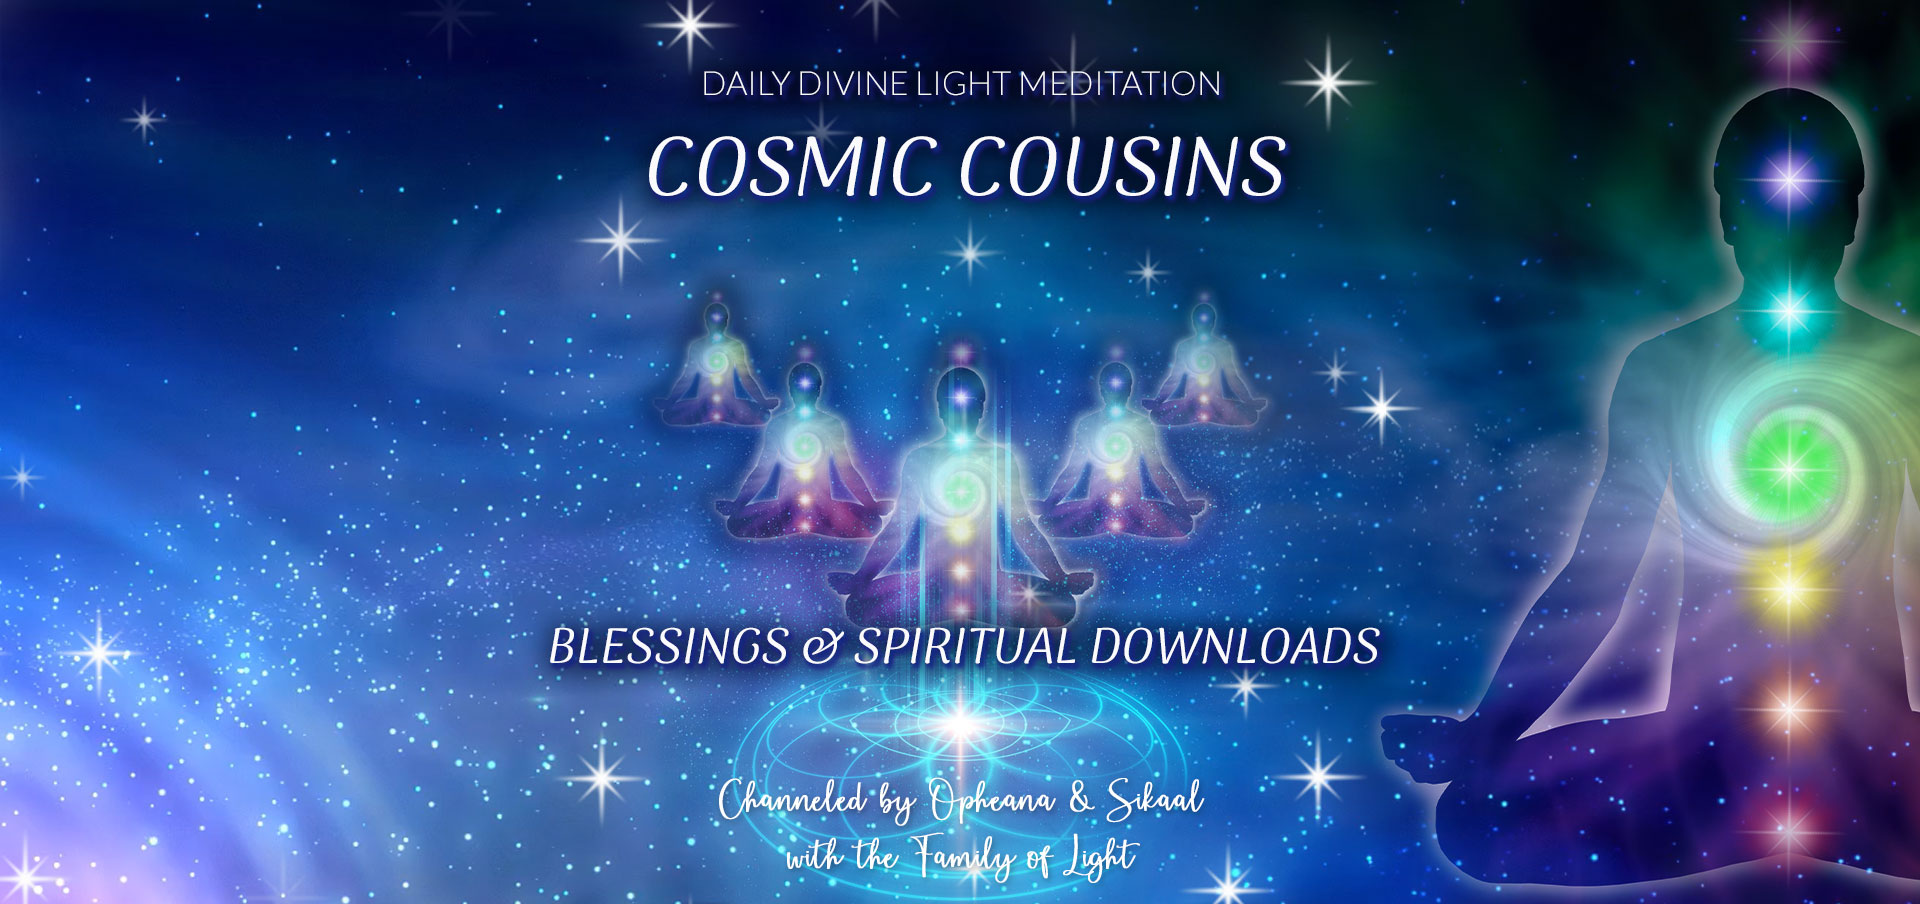 Daily Divine Light Meditation ~ Blessings & Spiritual Downloads ~ Cosmic Cousins ~ Tuesday 11 April 2023